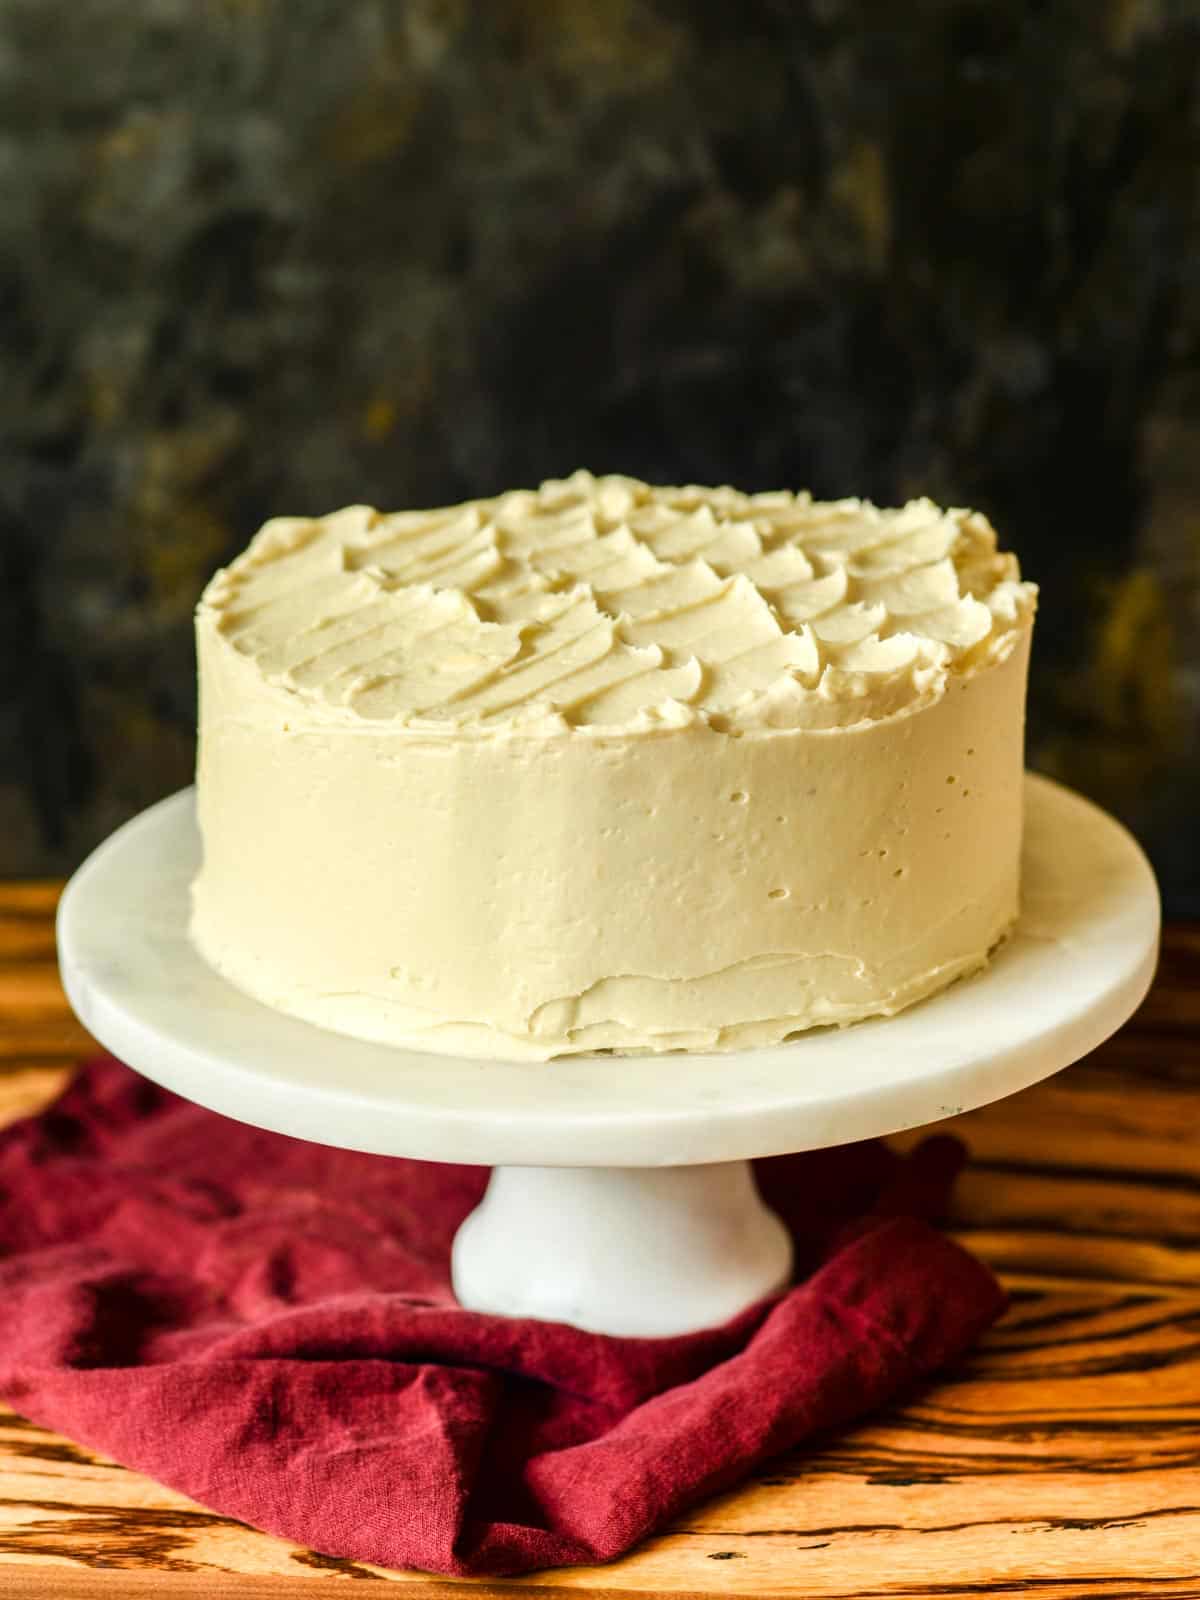 Banana Cake with Cream Cheese Frosting - Foodology Geek